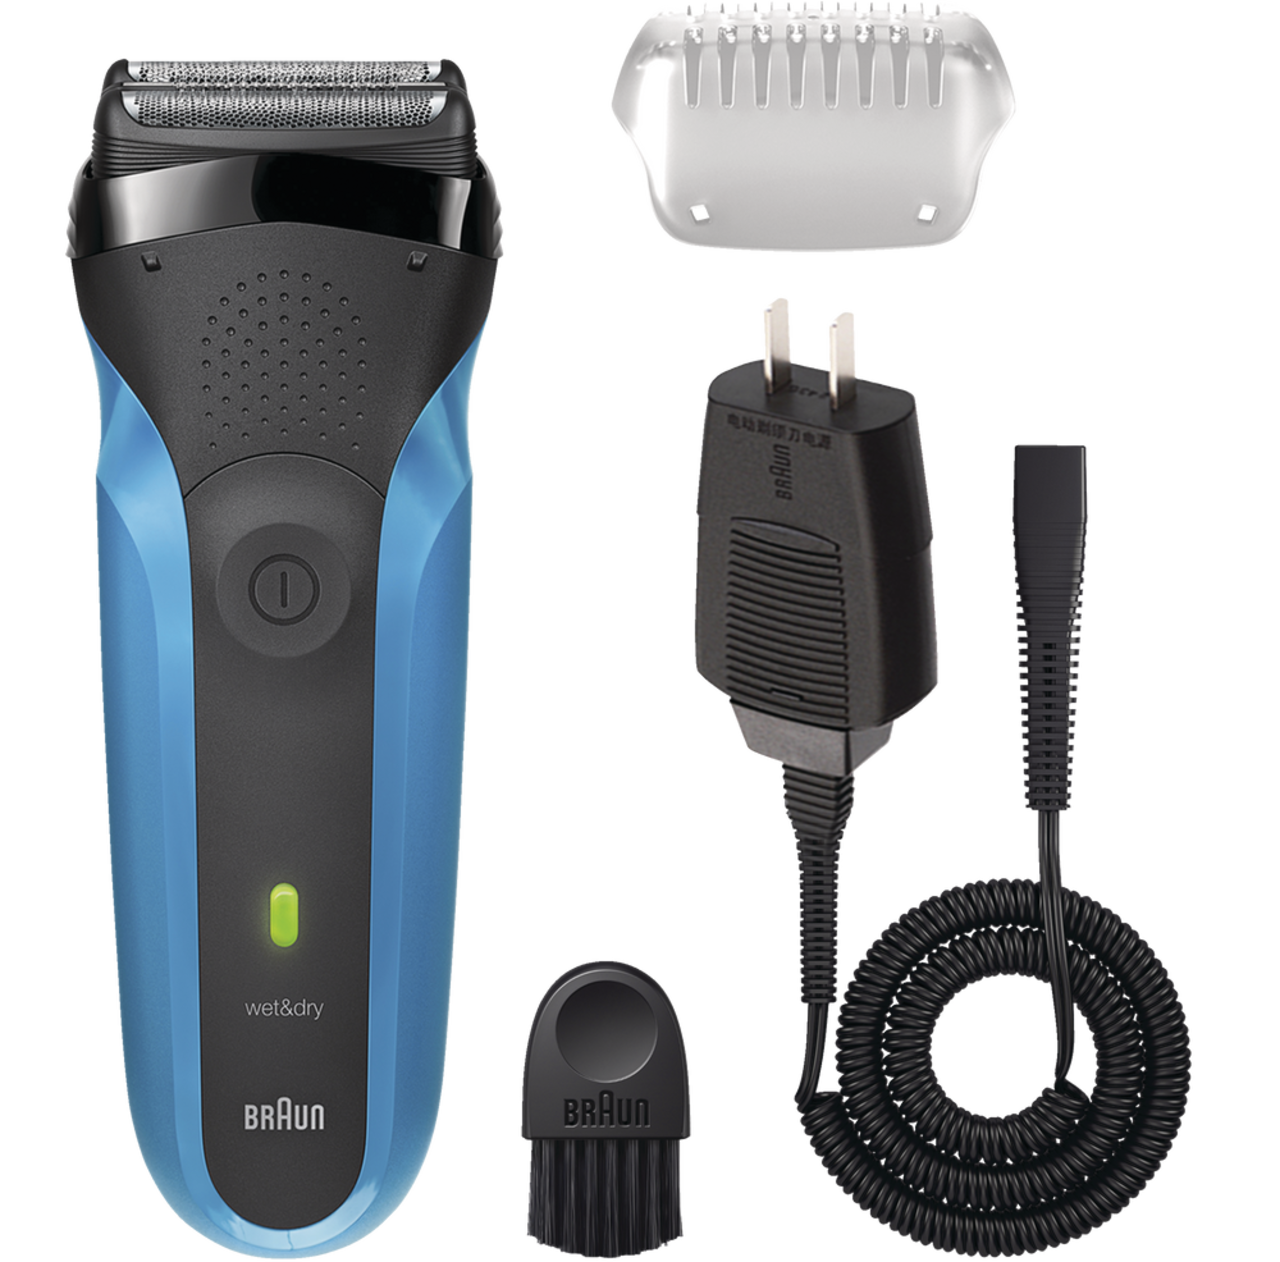 https://media-www.canadiantire.ca/product/living/personal-garment-care/personal-care/0438798/braun-series-3-foil-shaver-blue-555442e7-a3fd-49e2-9838-66dc298fe28f.png?imdensity=1&imwidth=640&impolicy=mZoom